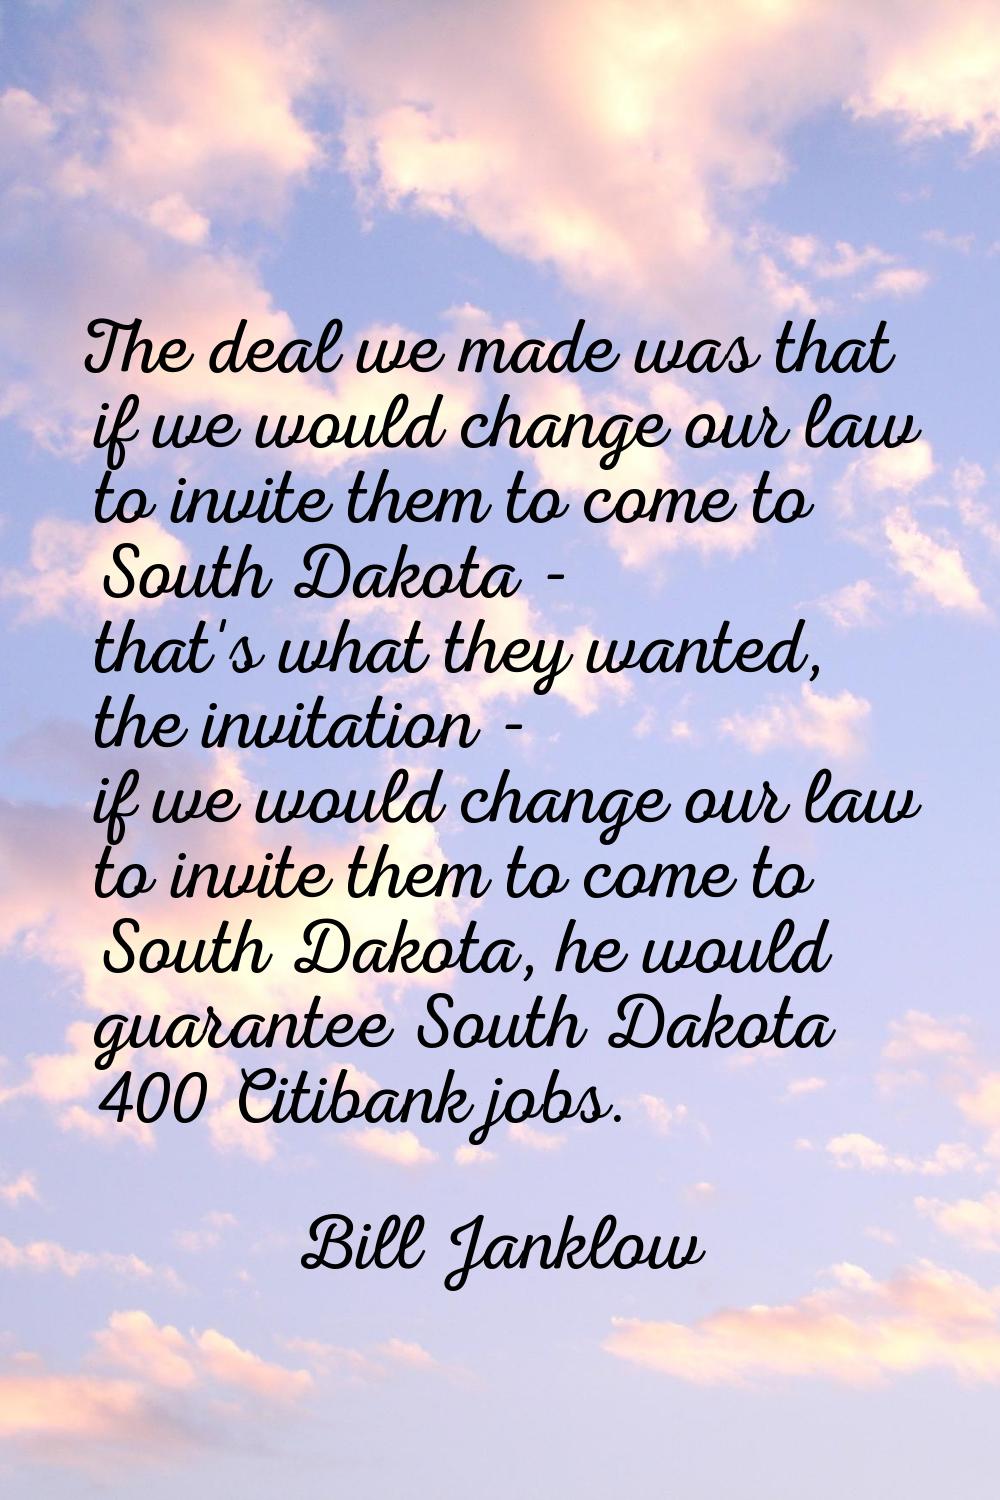 The deal we made was that if we would change our law to invite them to come to South Dakota - that'